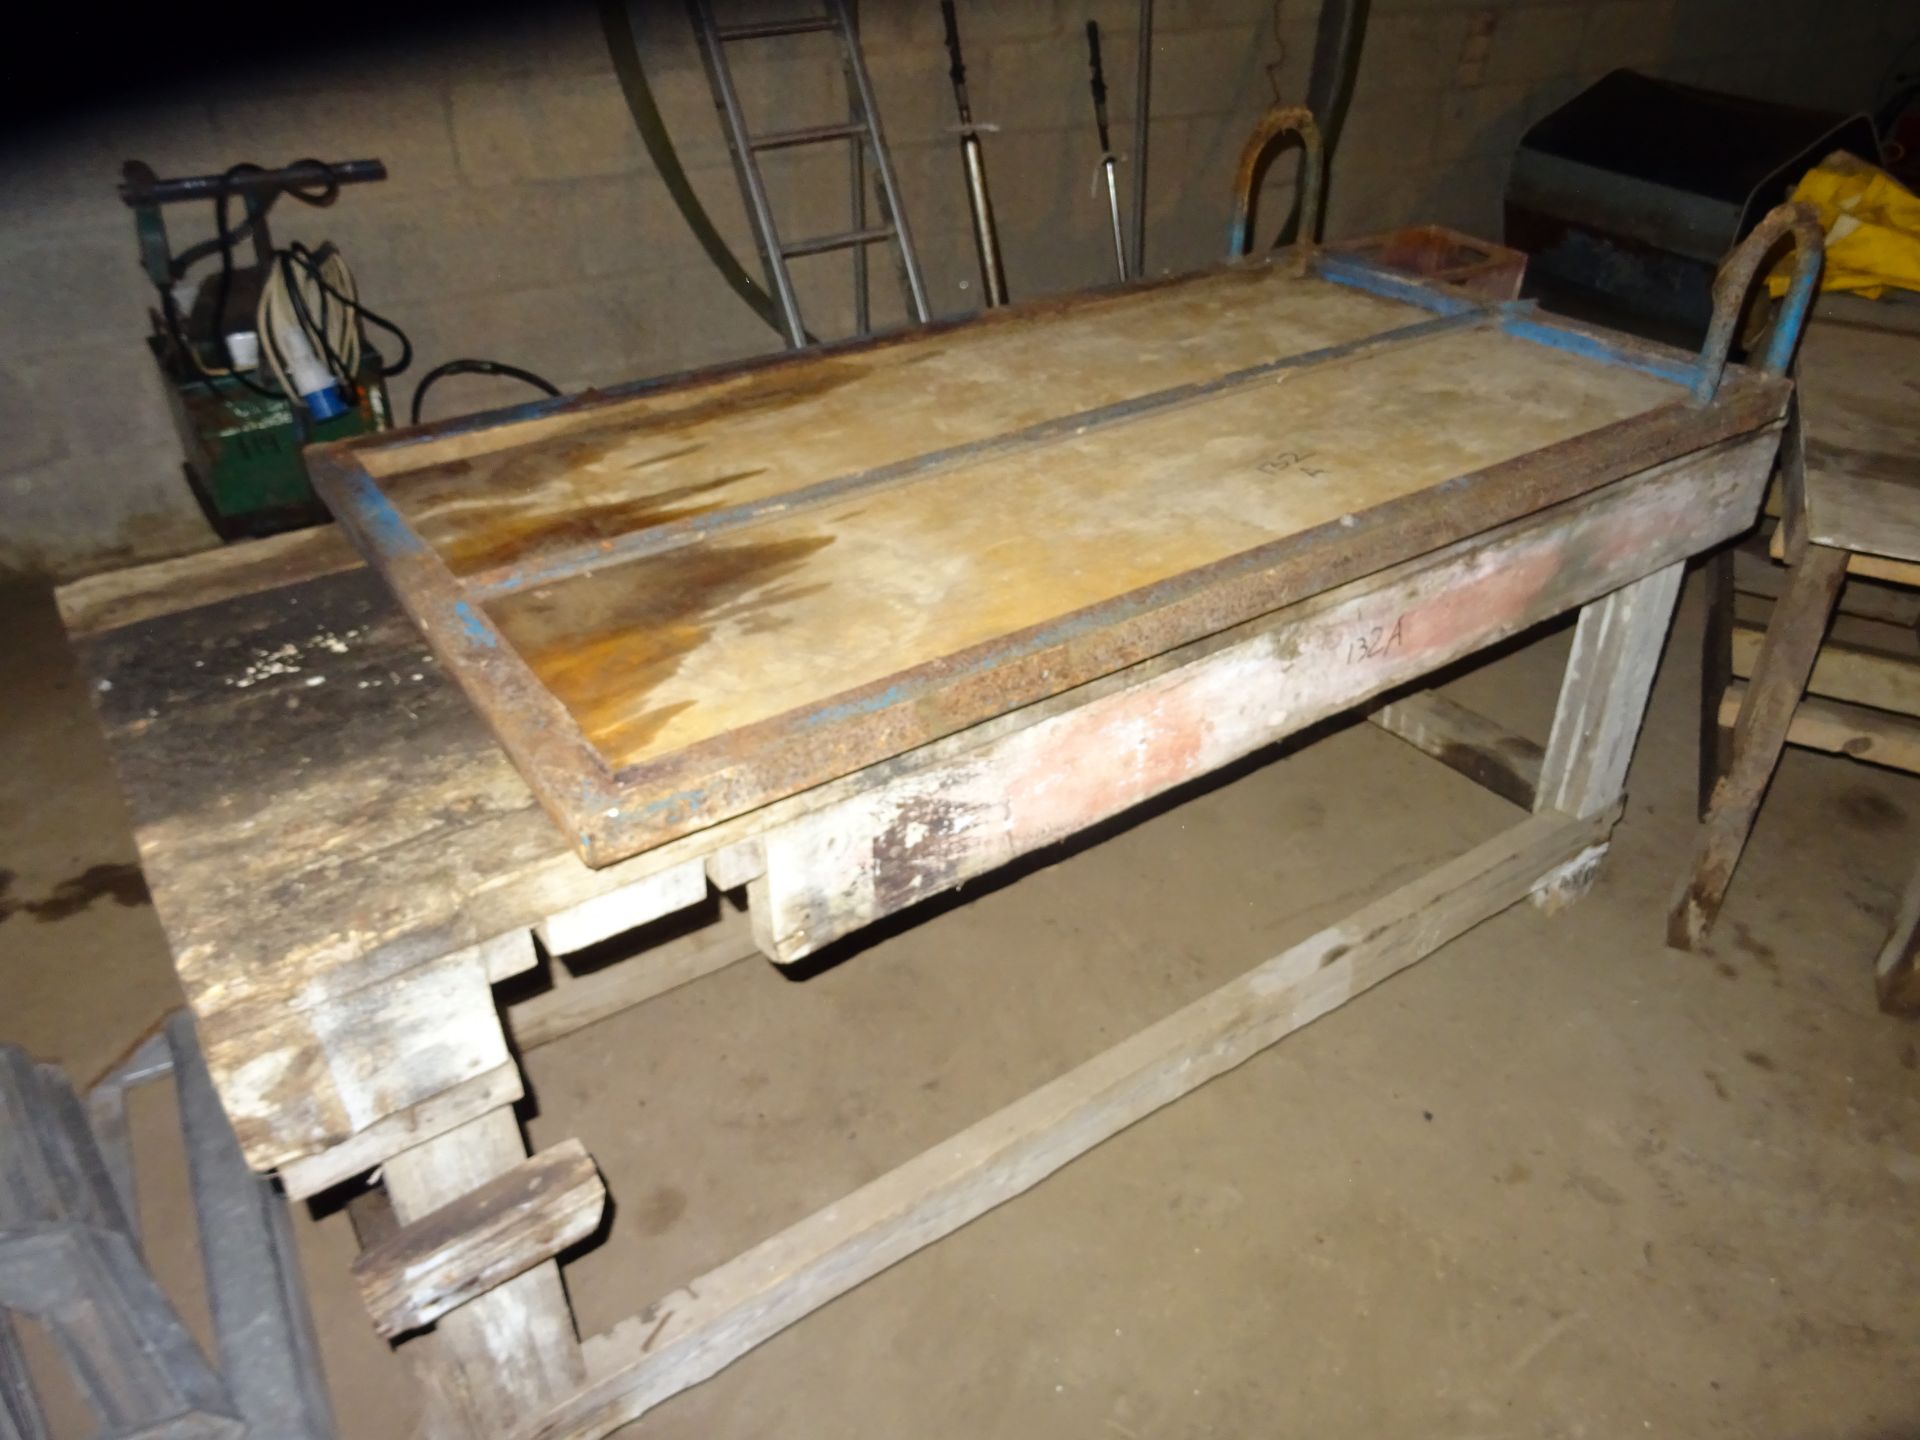 WORKSHOP BENCH AND LOW RAMP